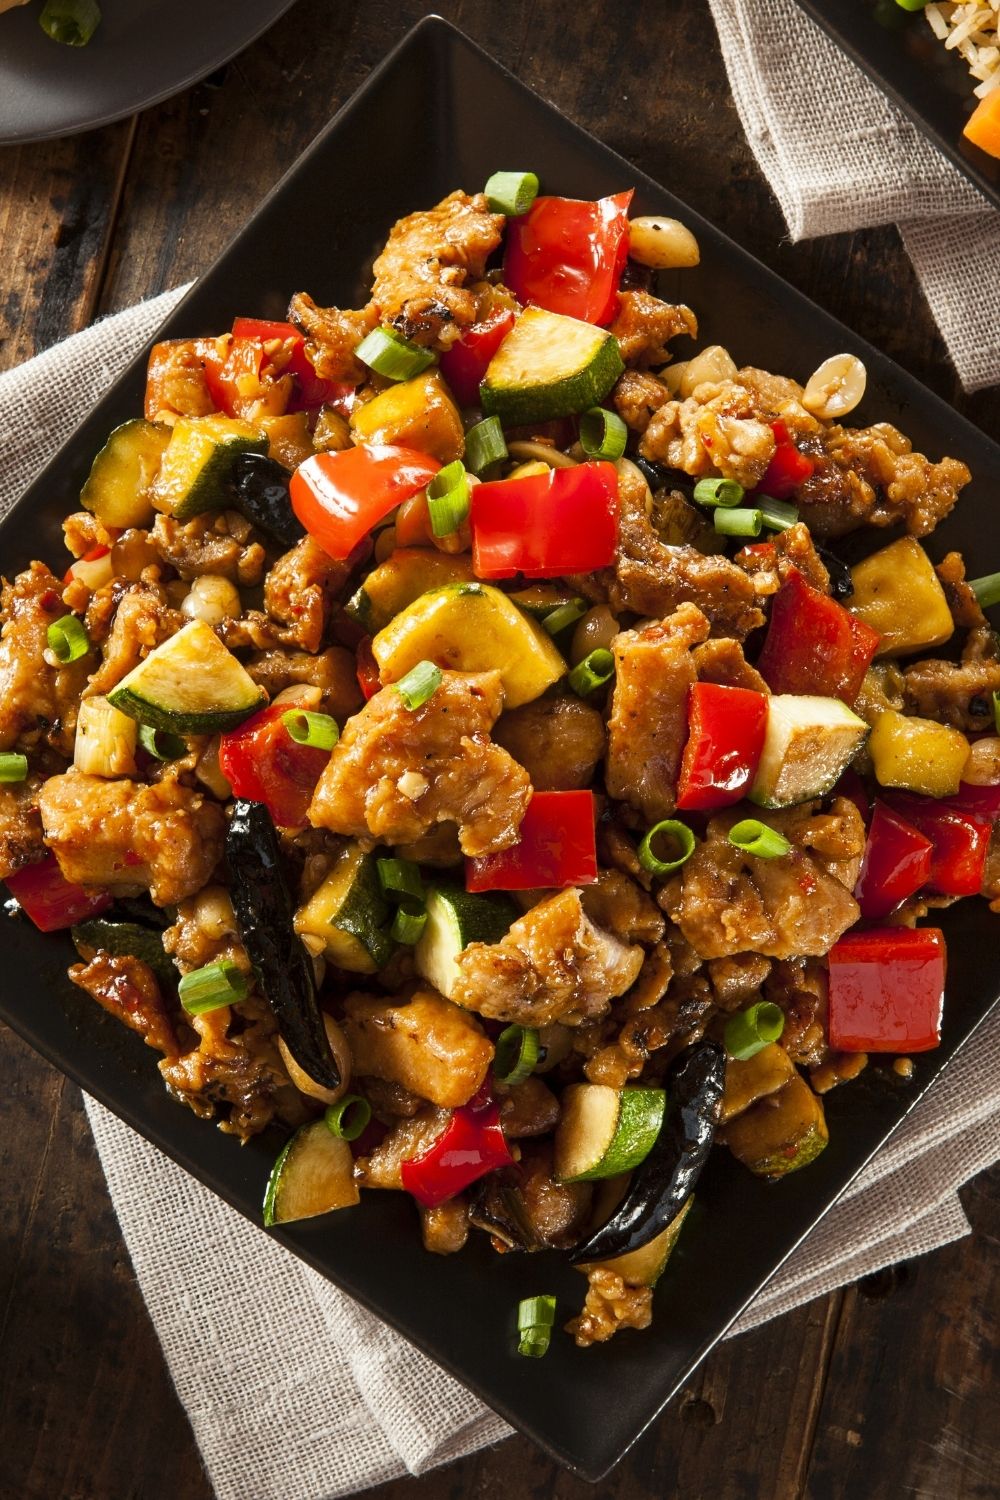 Easy Diced Chicken Recipes You'll Love including Homemade Kung Pao Chicken with Veggies